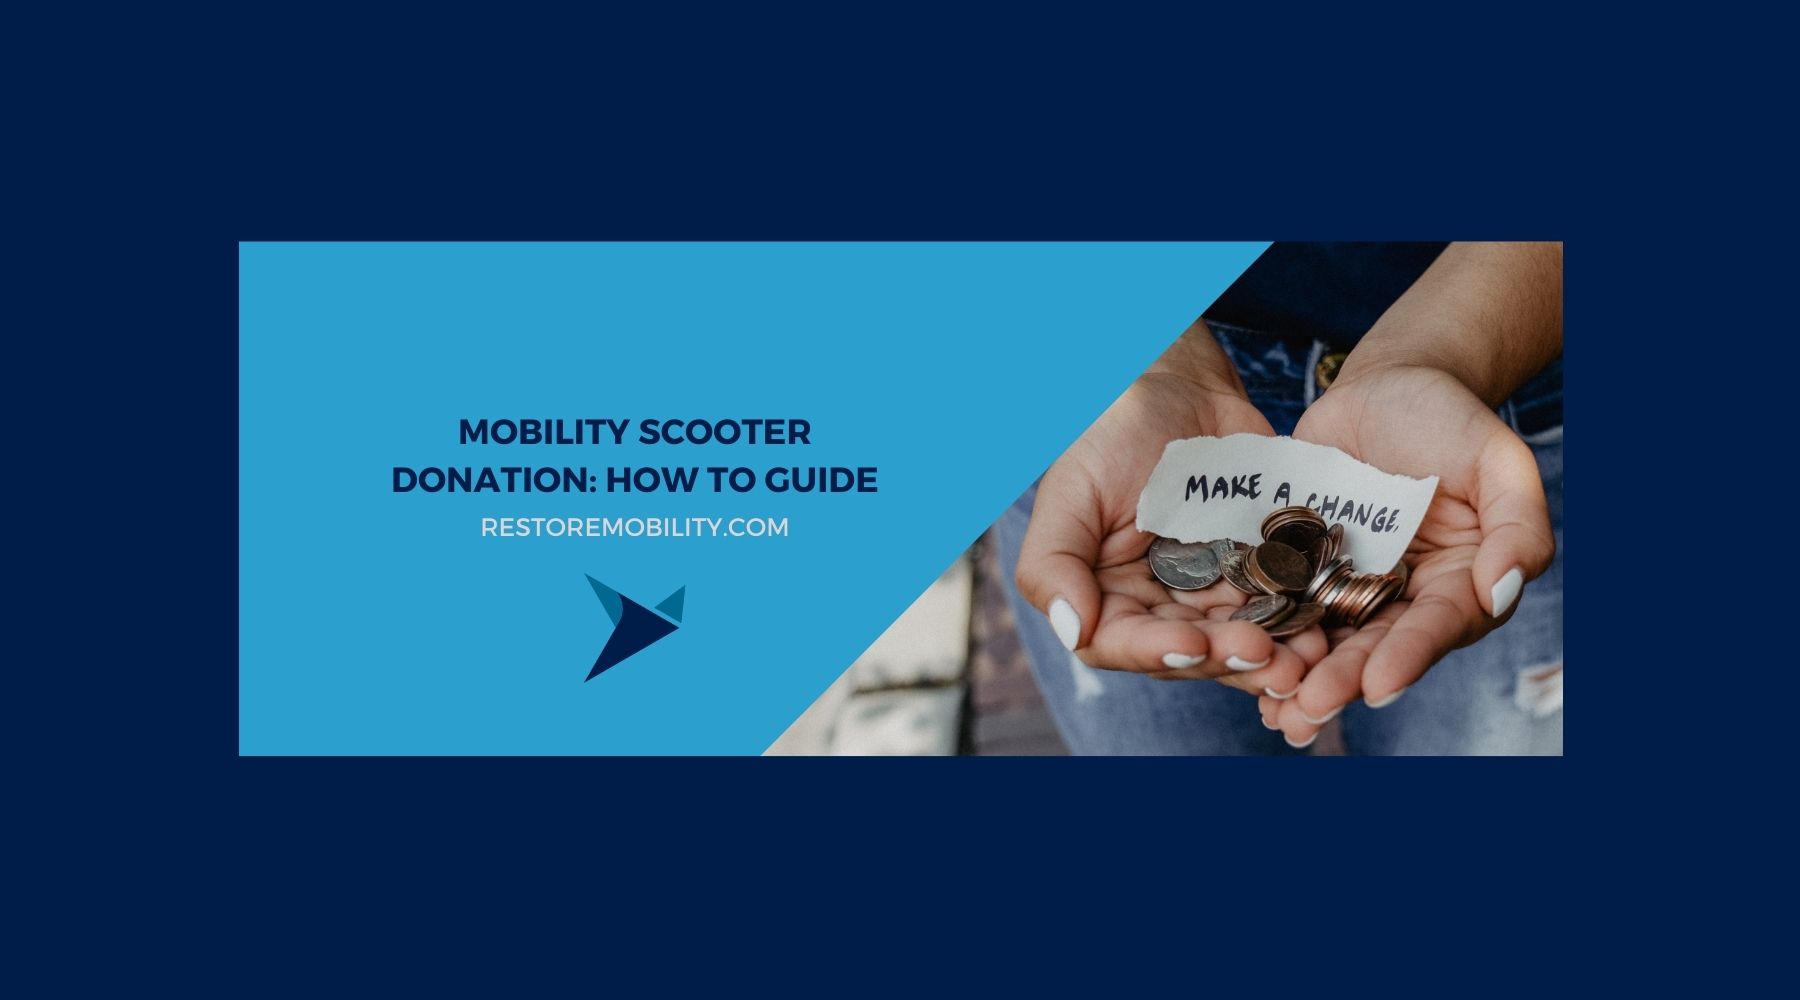 Mobility Scooter Donation: How to Guide